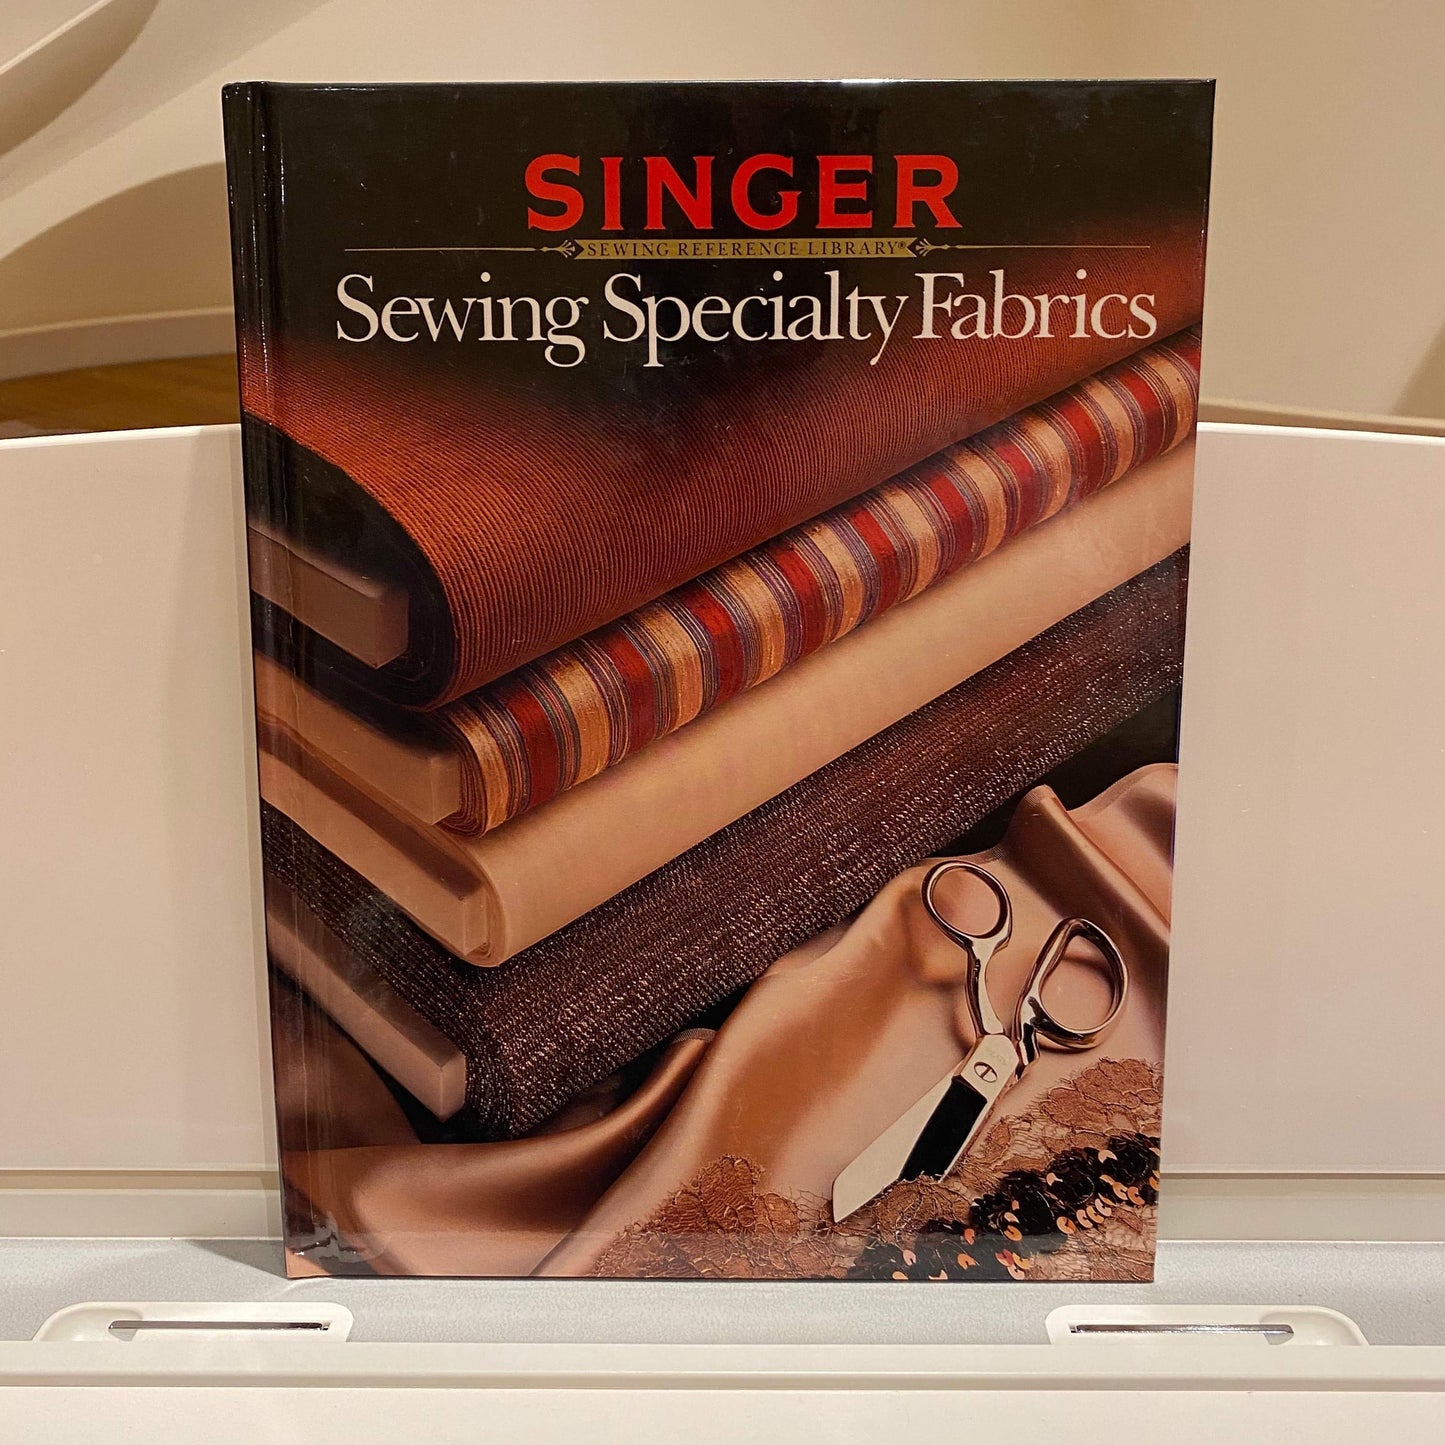 Singer Sewing Reference Library - Sewing Speciality Fabrics (hardback book)